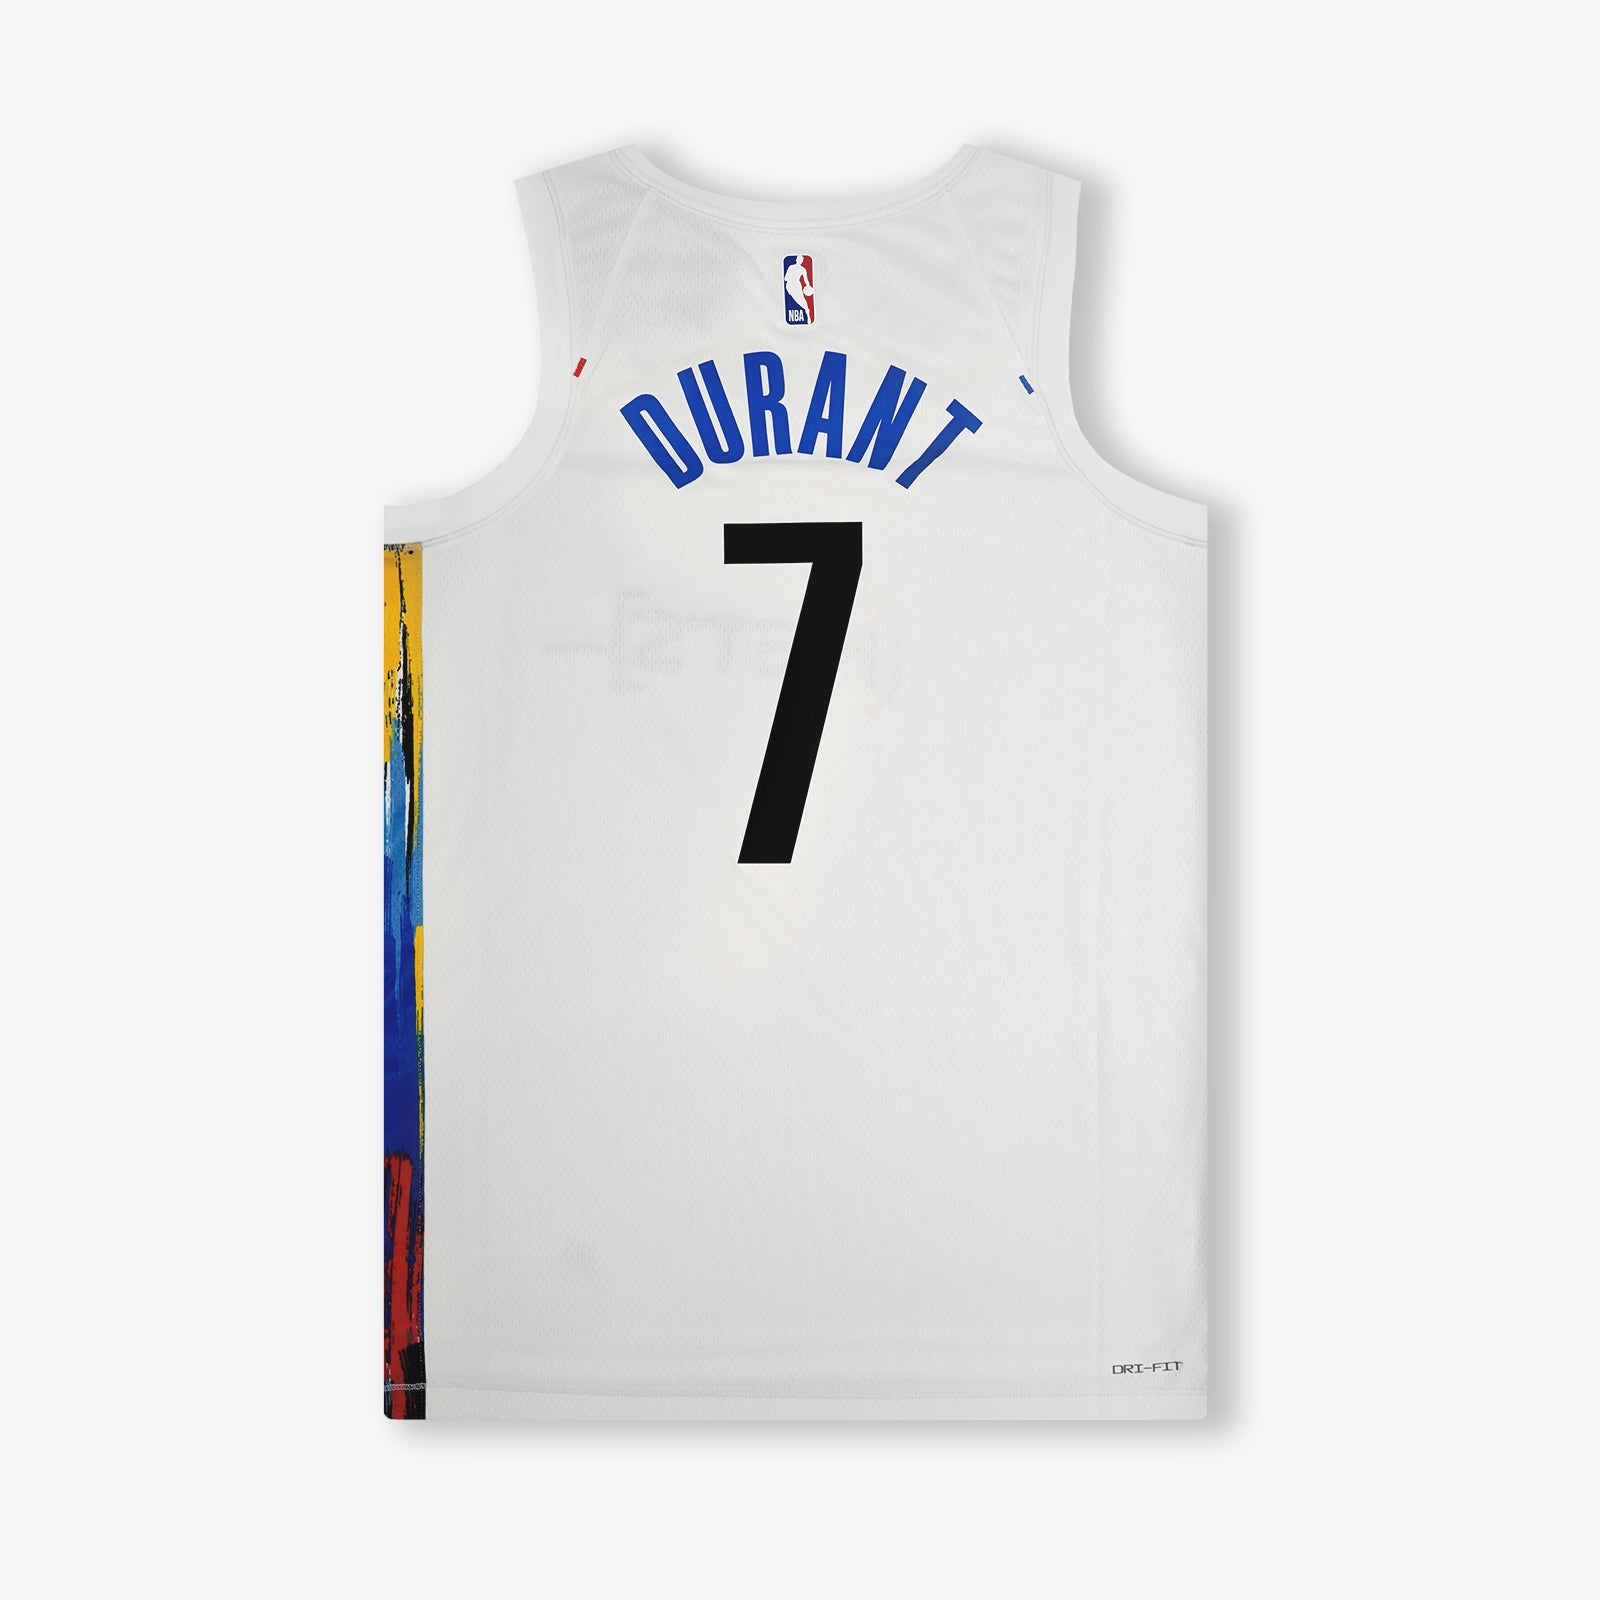 I Bought The Brooklyn Nets City Edition Basquiat Jersey 